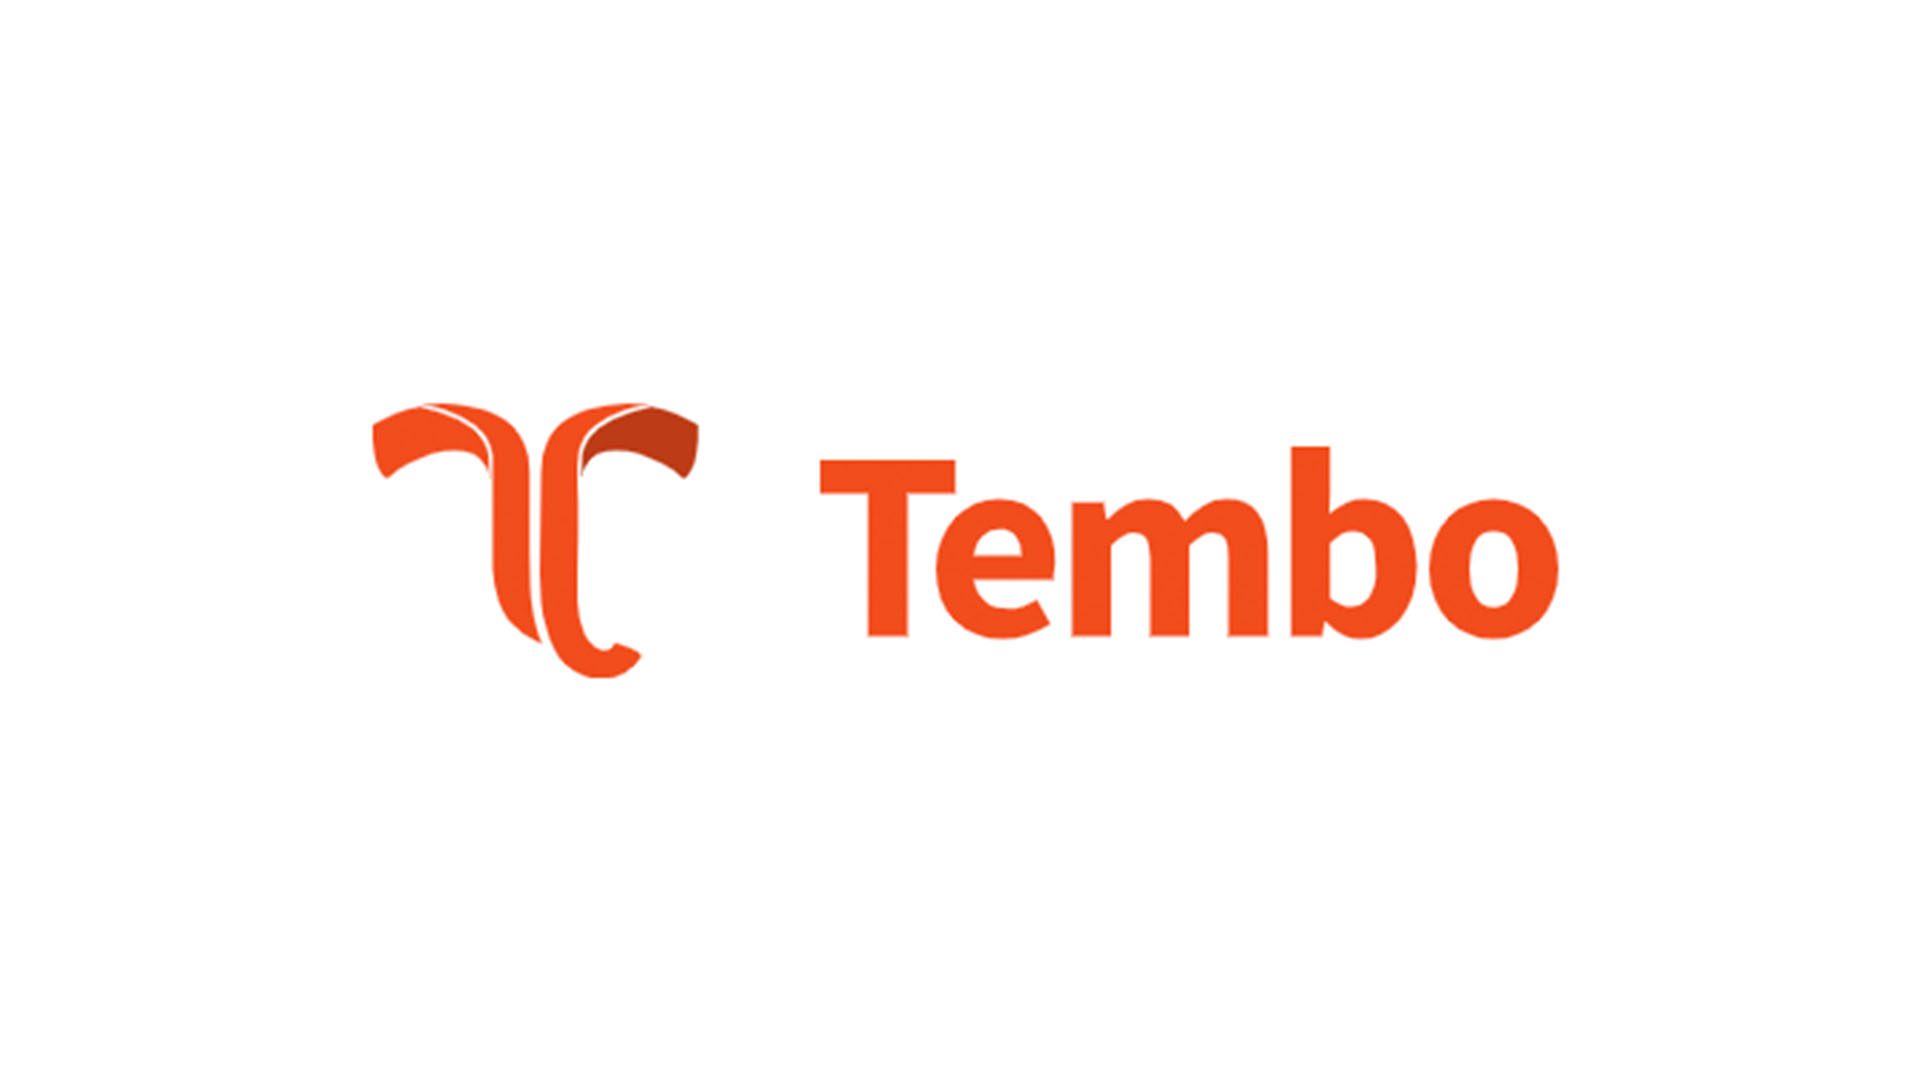 Gemba is part of The Tembo Group